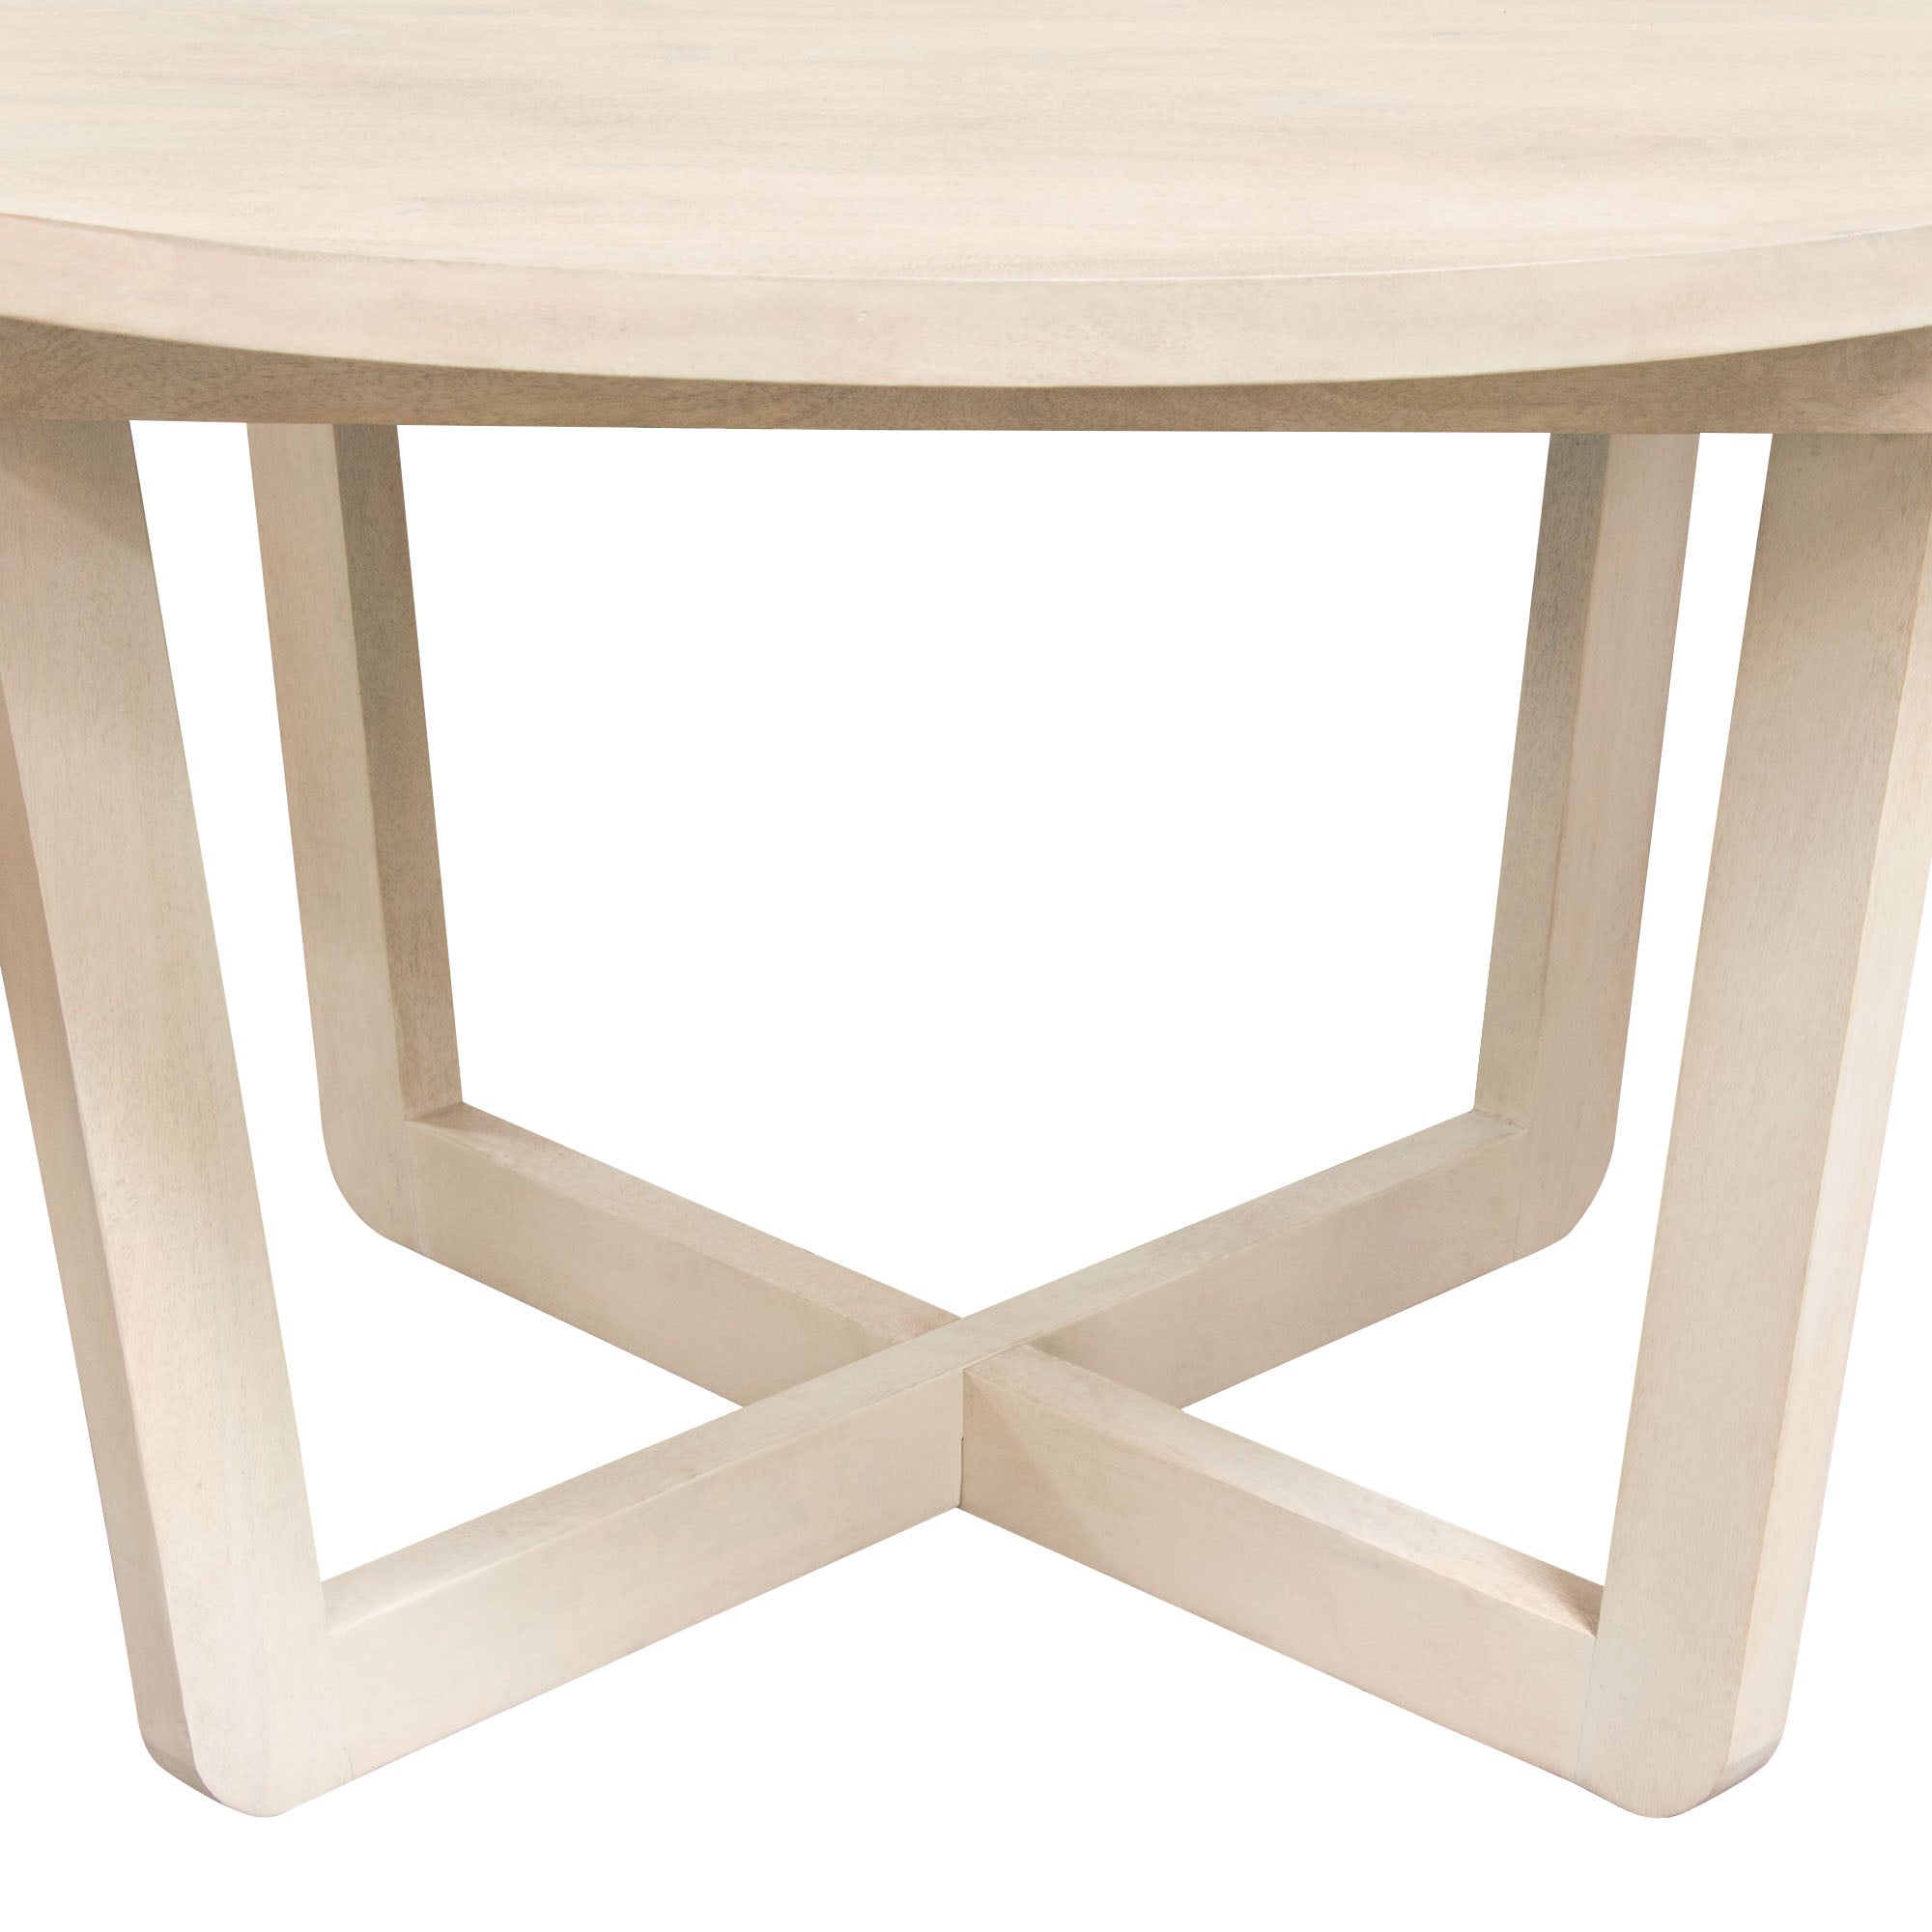 SOLANO DINING TABLE